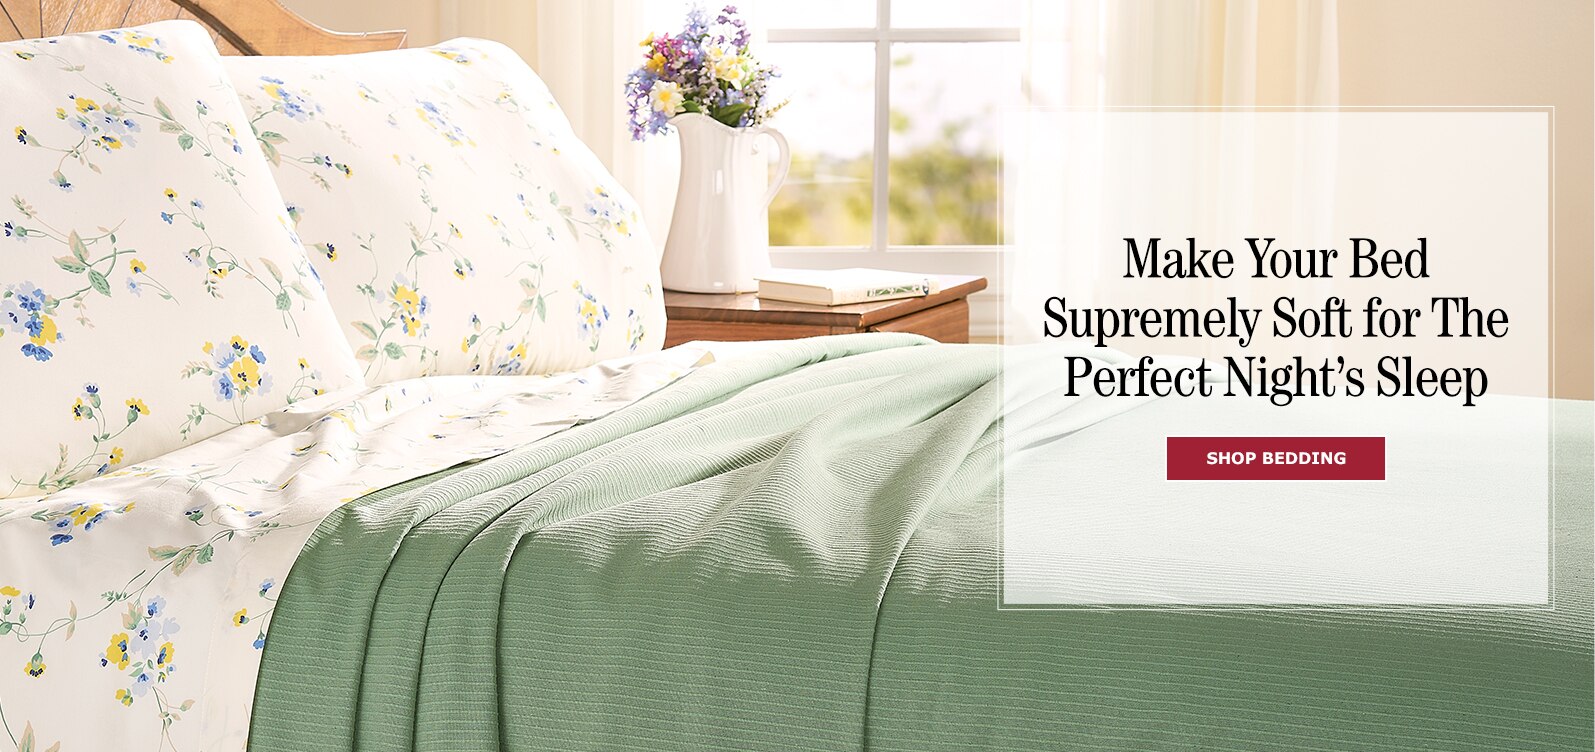 Make Your Bed Supremely Soft for the Perfect Night's Sleep.  Shop Bedding